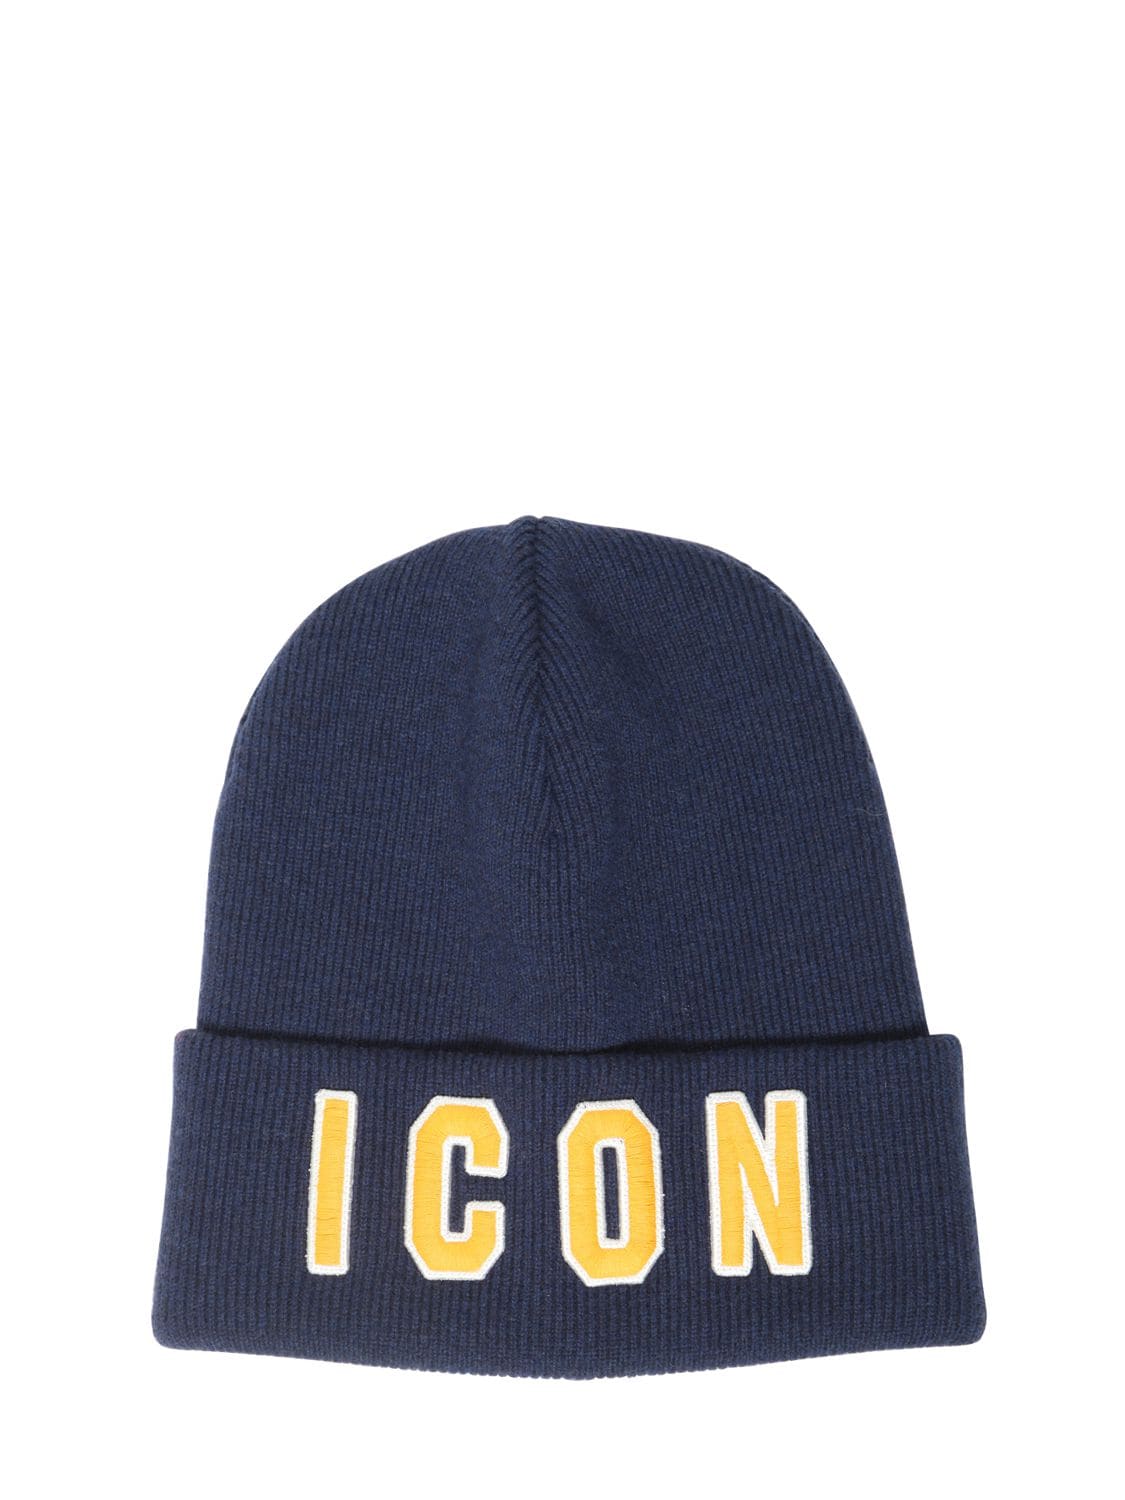 DSQUARED2 ICON PATCH KNIT WOOL BEANIE HAT,72IG7F017-TTEZODY1